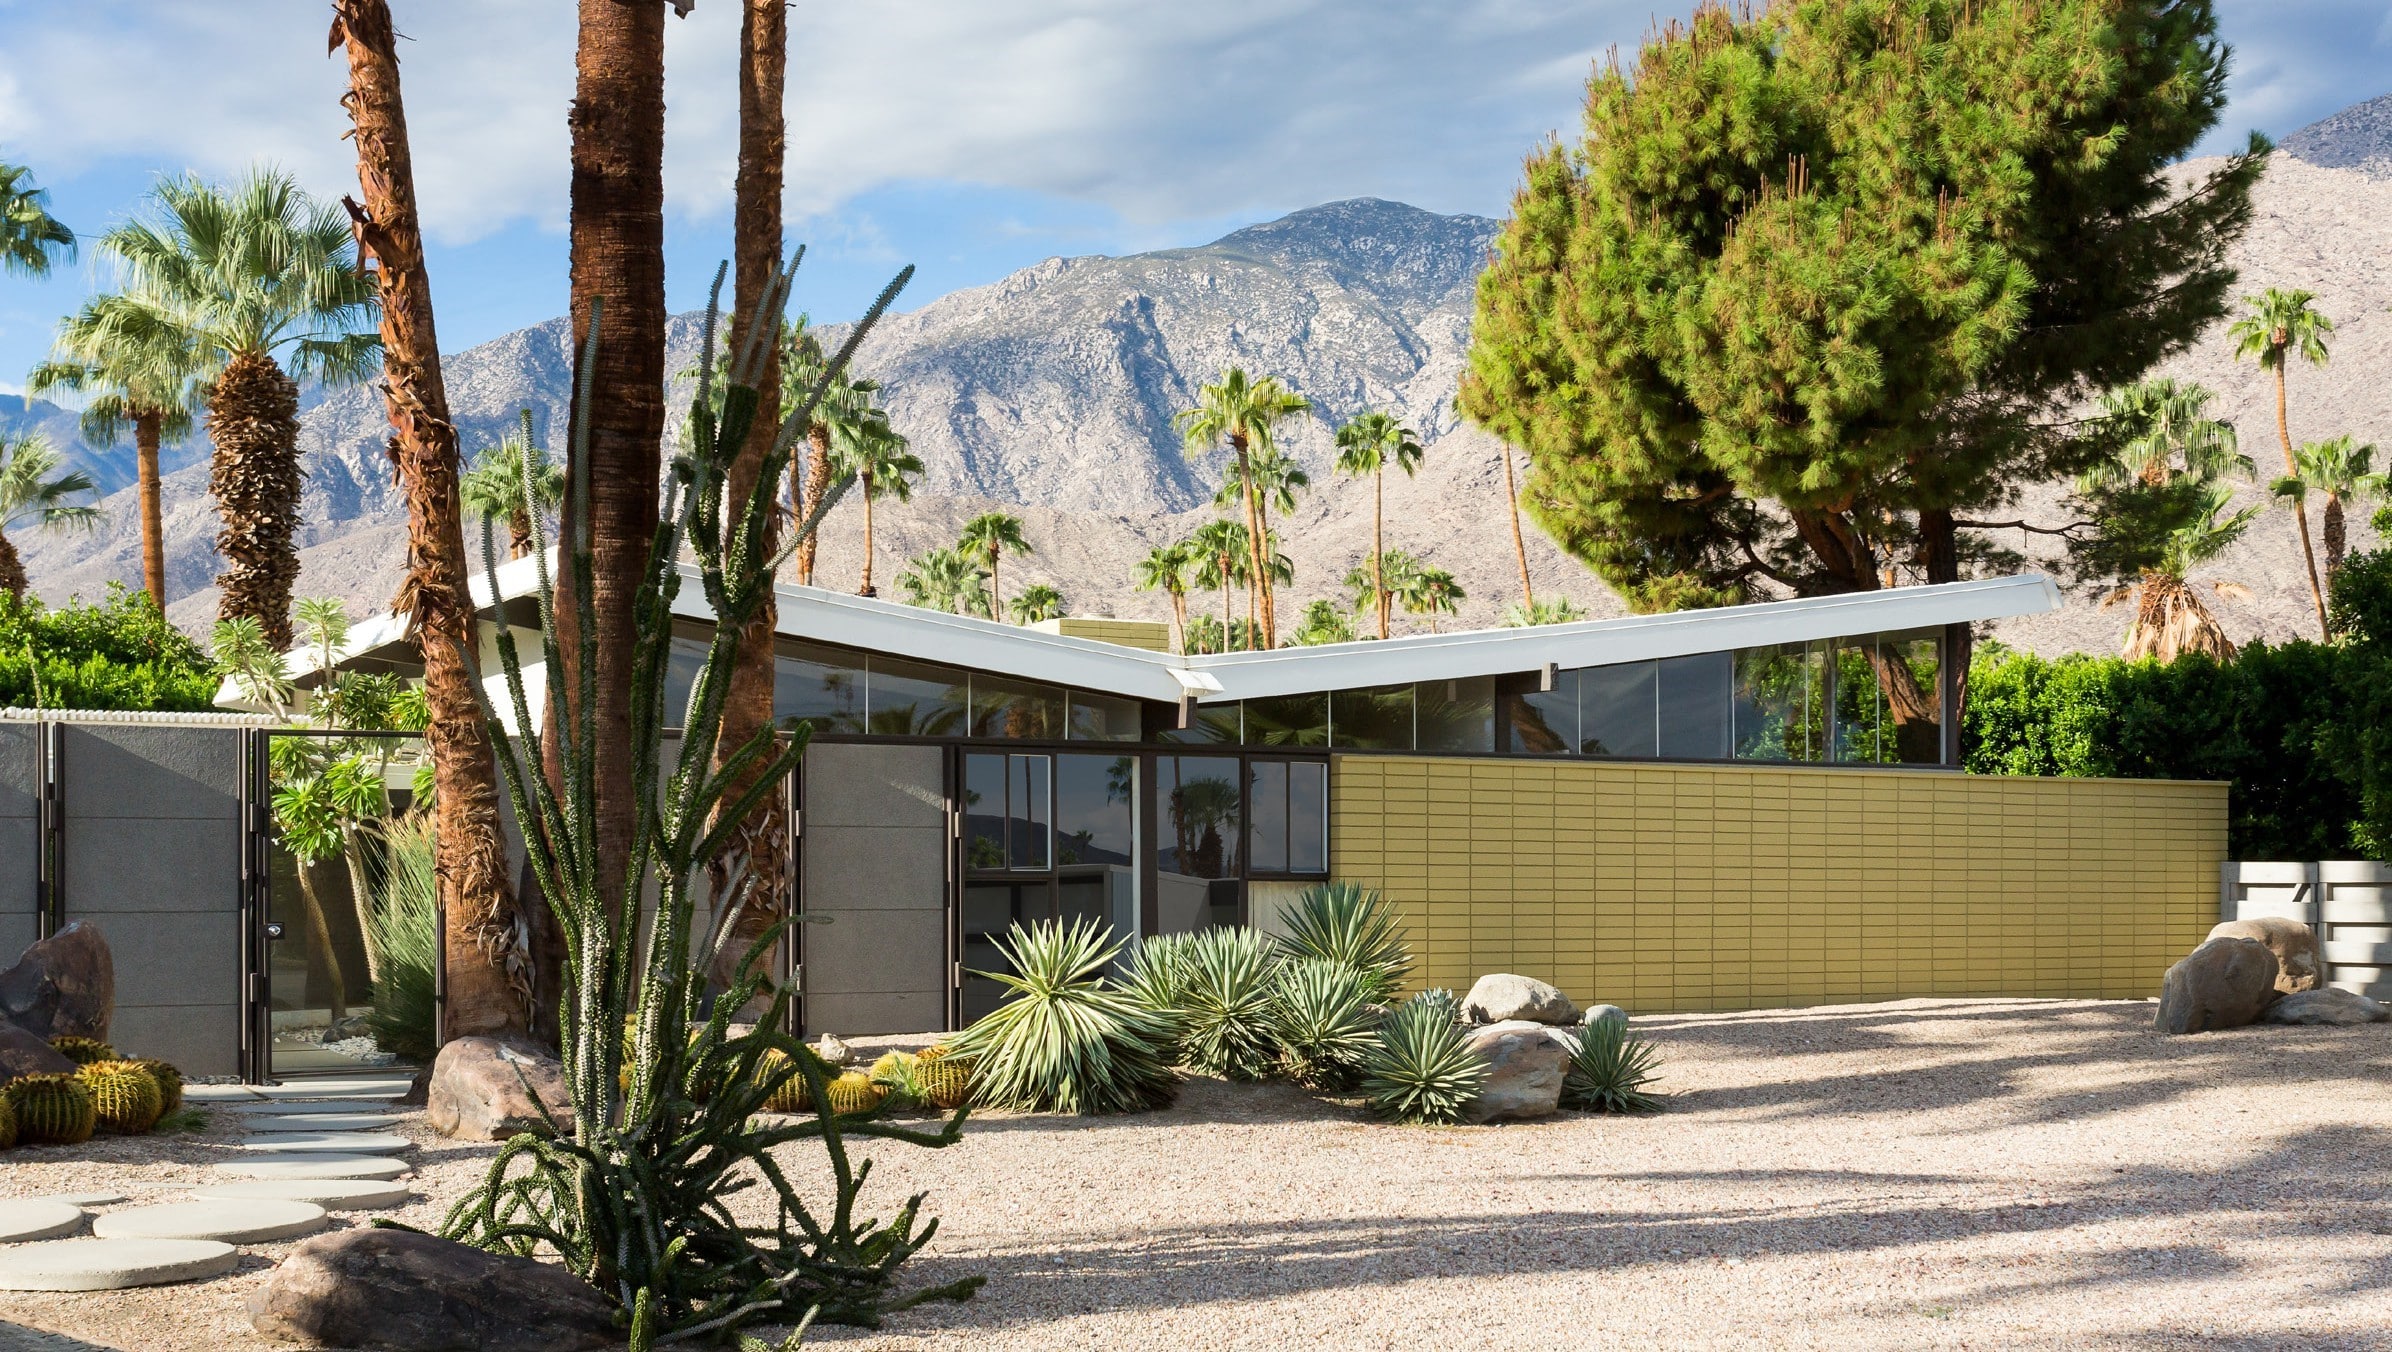 A mid-century modern house with a flat roof and large windows, surrounded by desert landscaping including cacti, palm trees, and rocks, set against a backdrop of mountainous terrain.